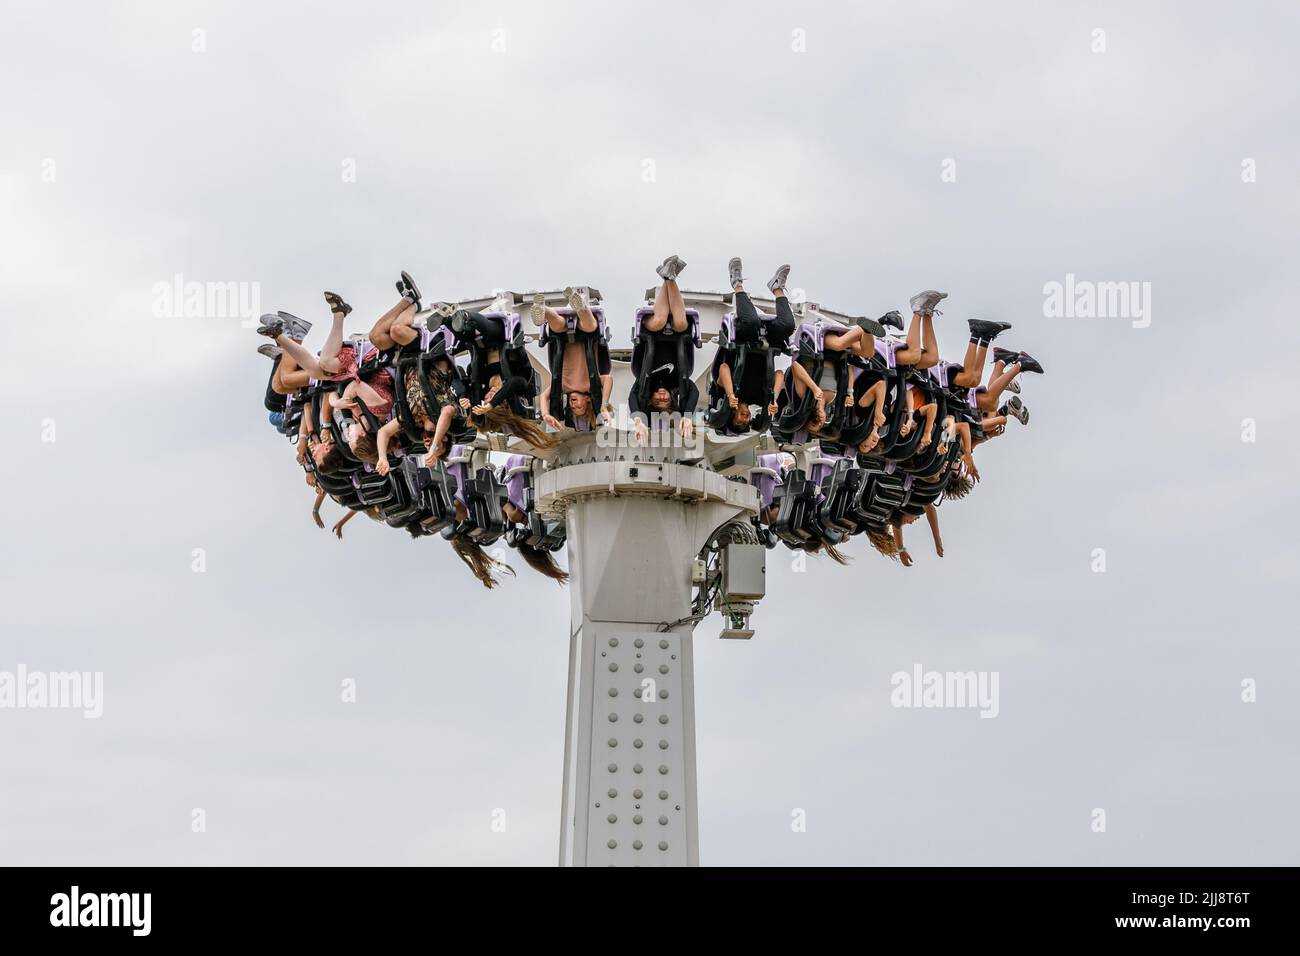 A pendulum ride gondola mid air with people hanging upside down with legs in the air. Stock Photo